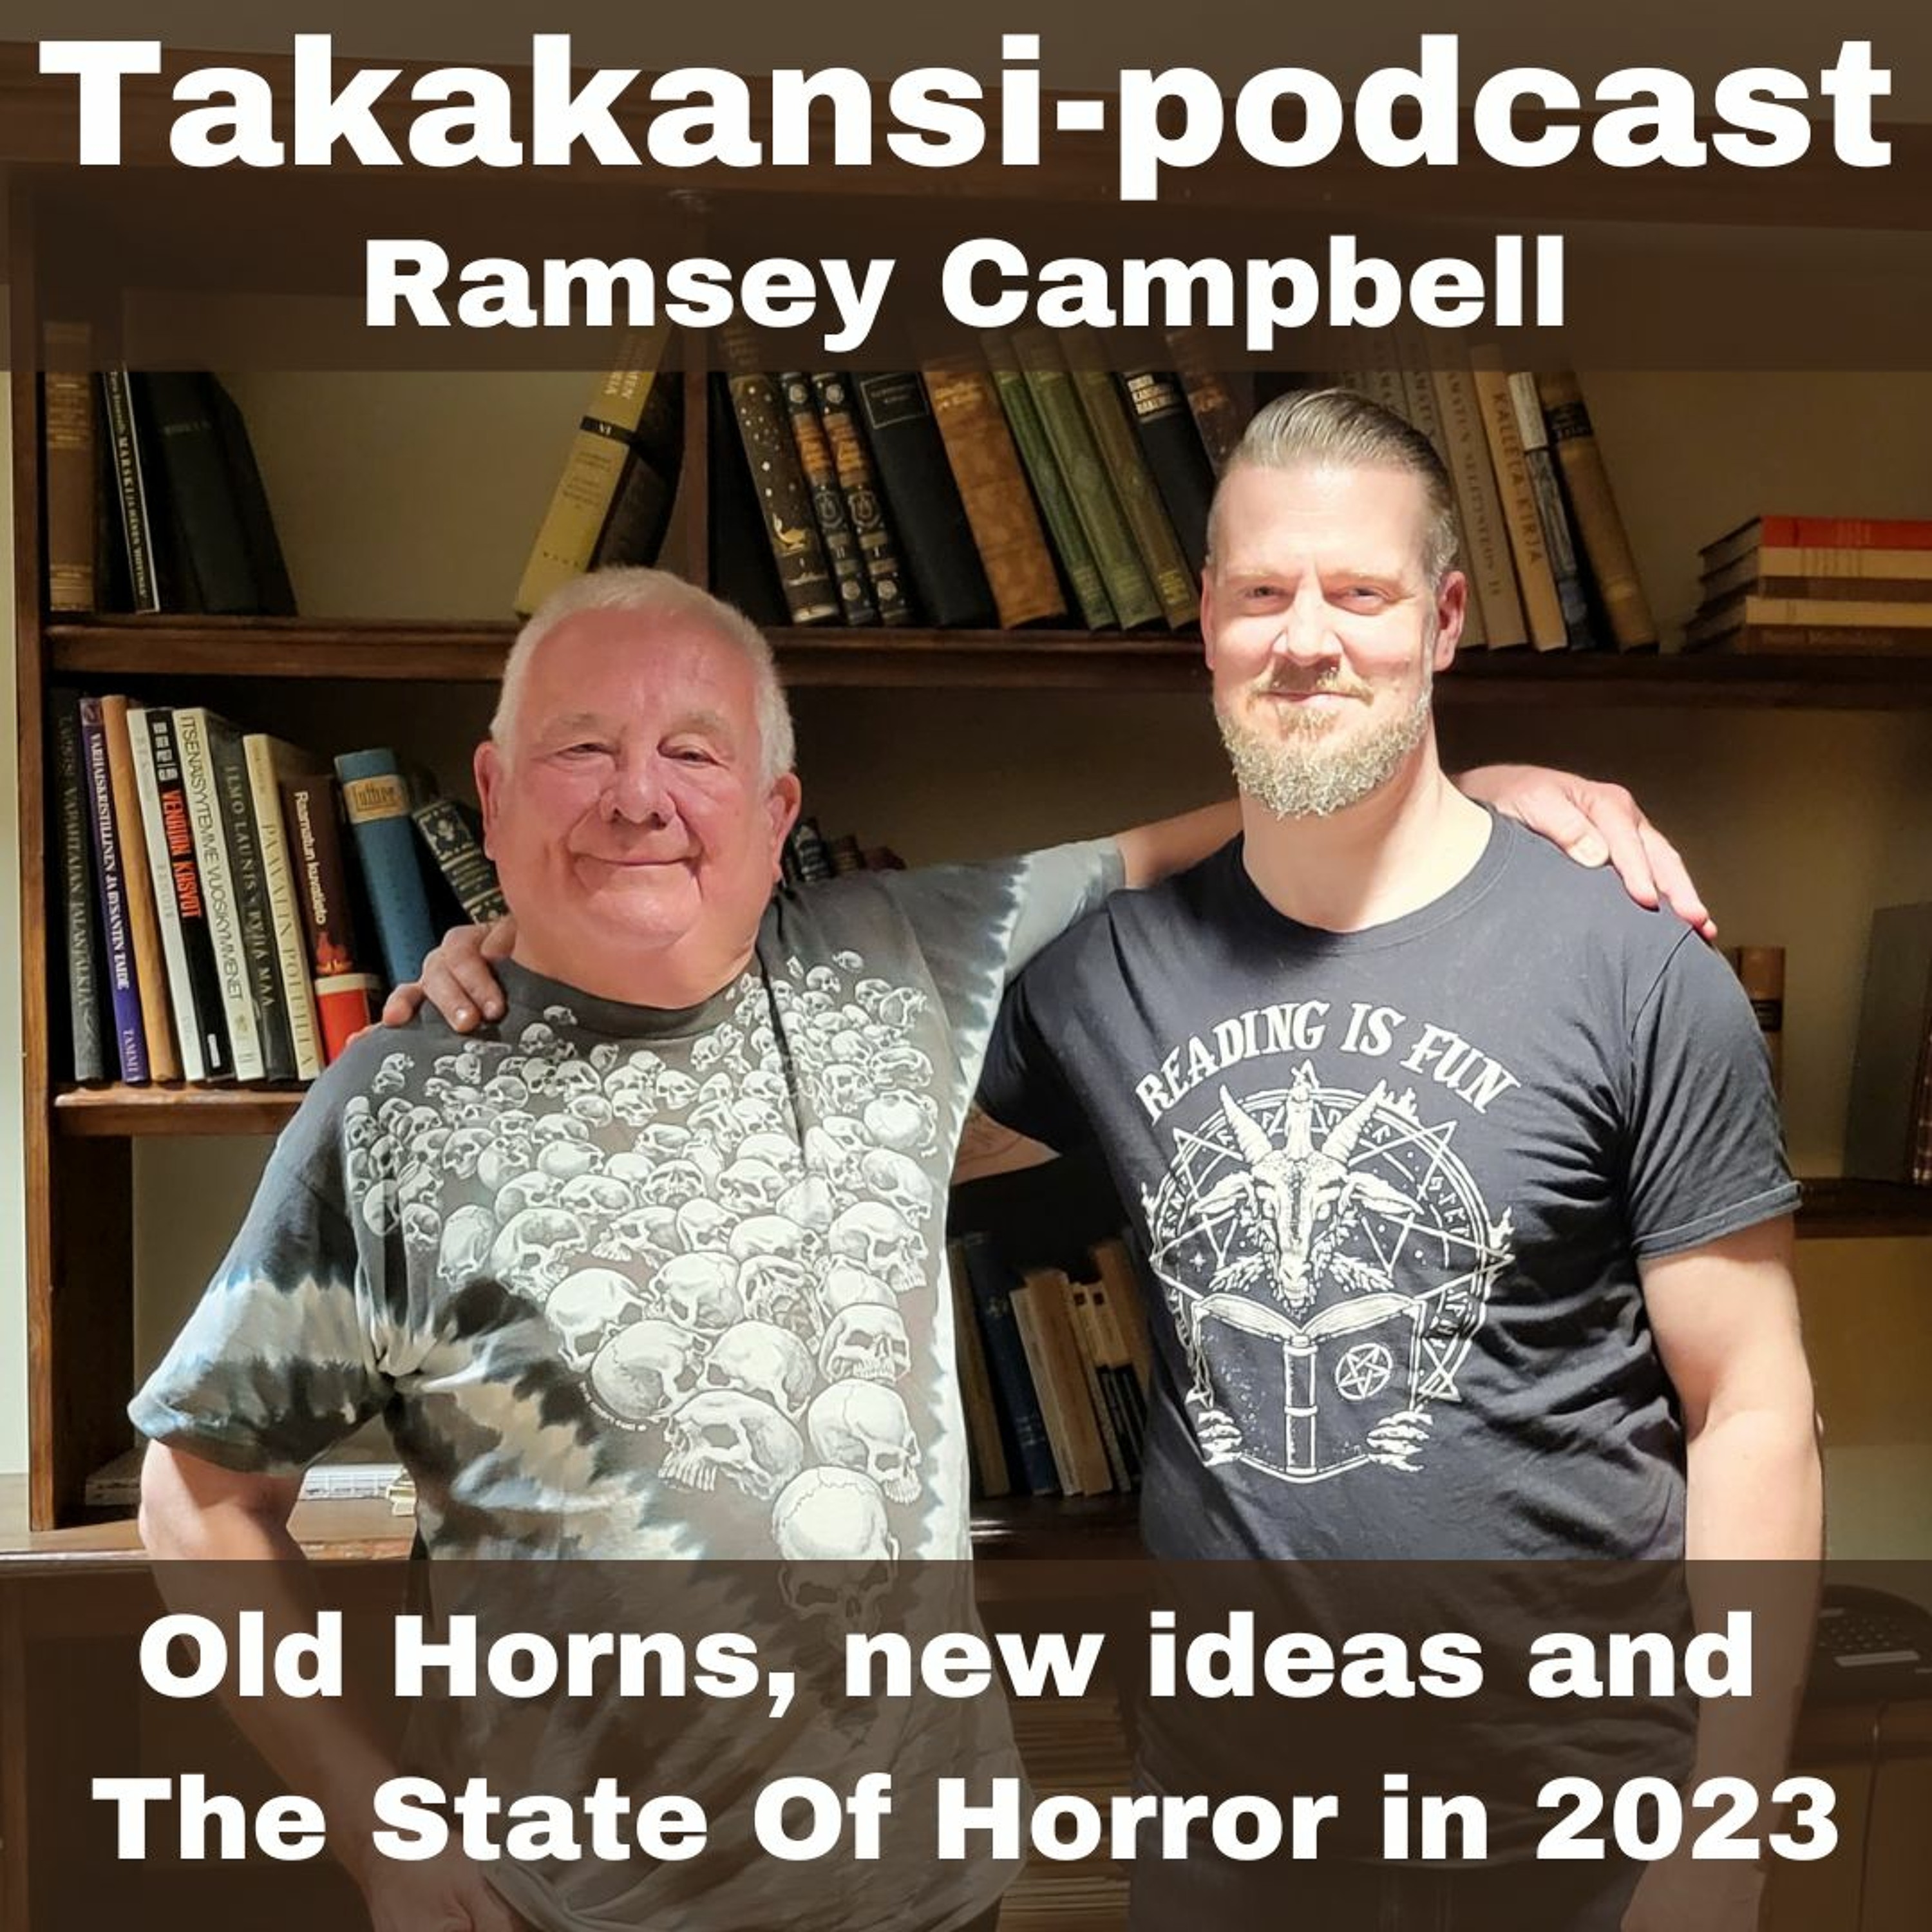 Ramsey Campbell - Old Horns, new ideas and The State Of Horror in 2023